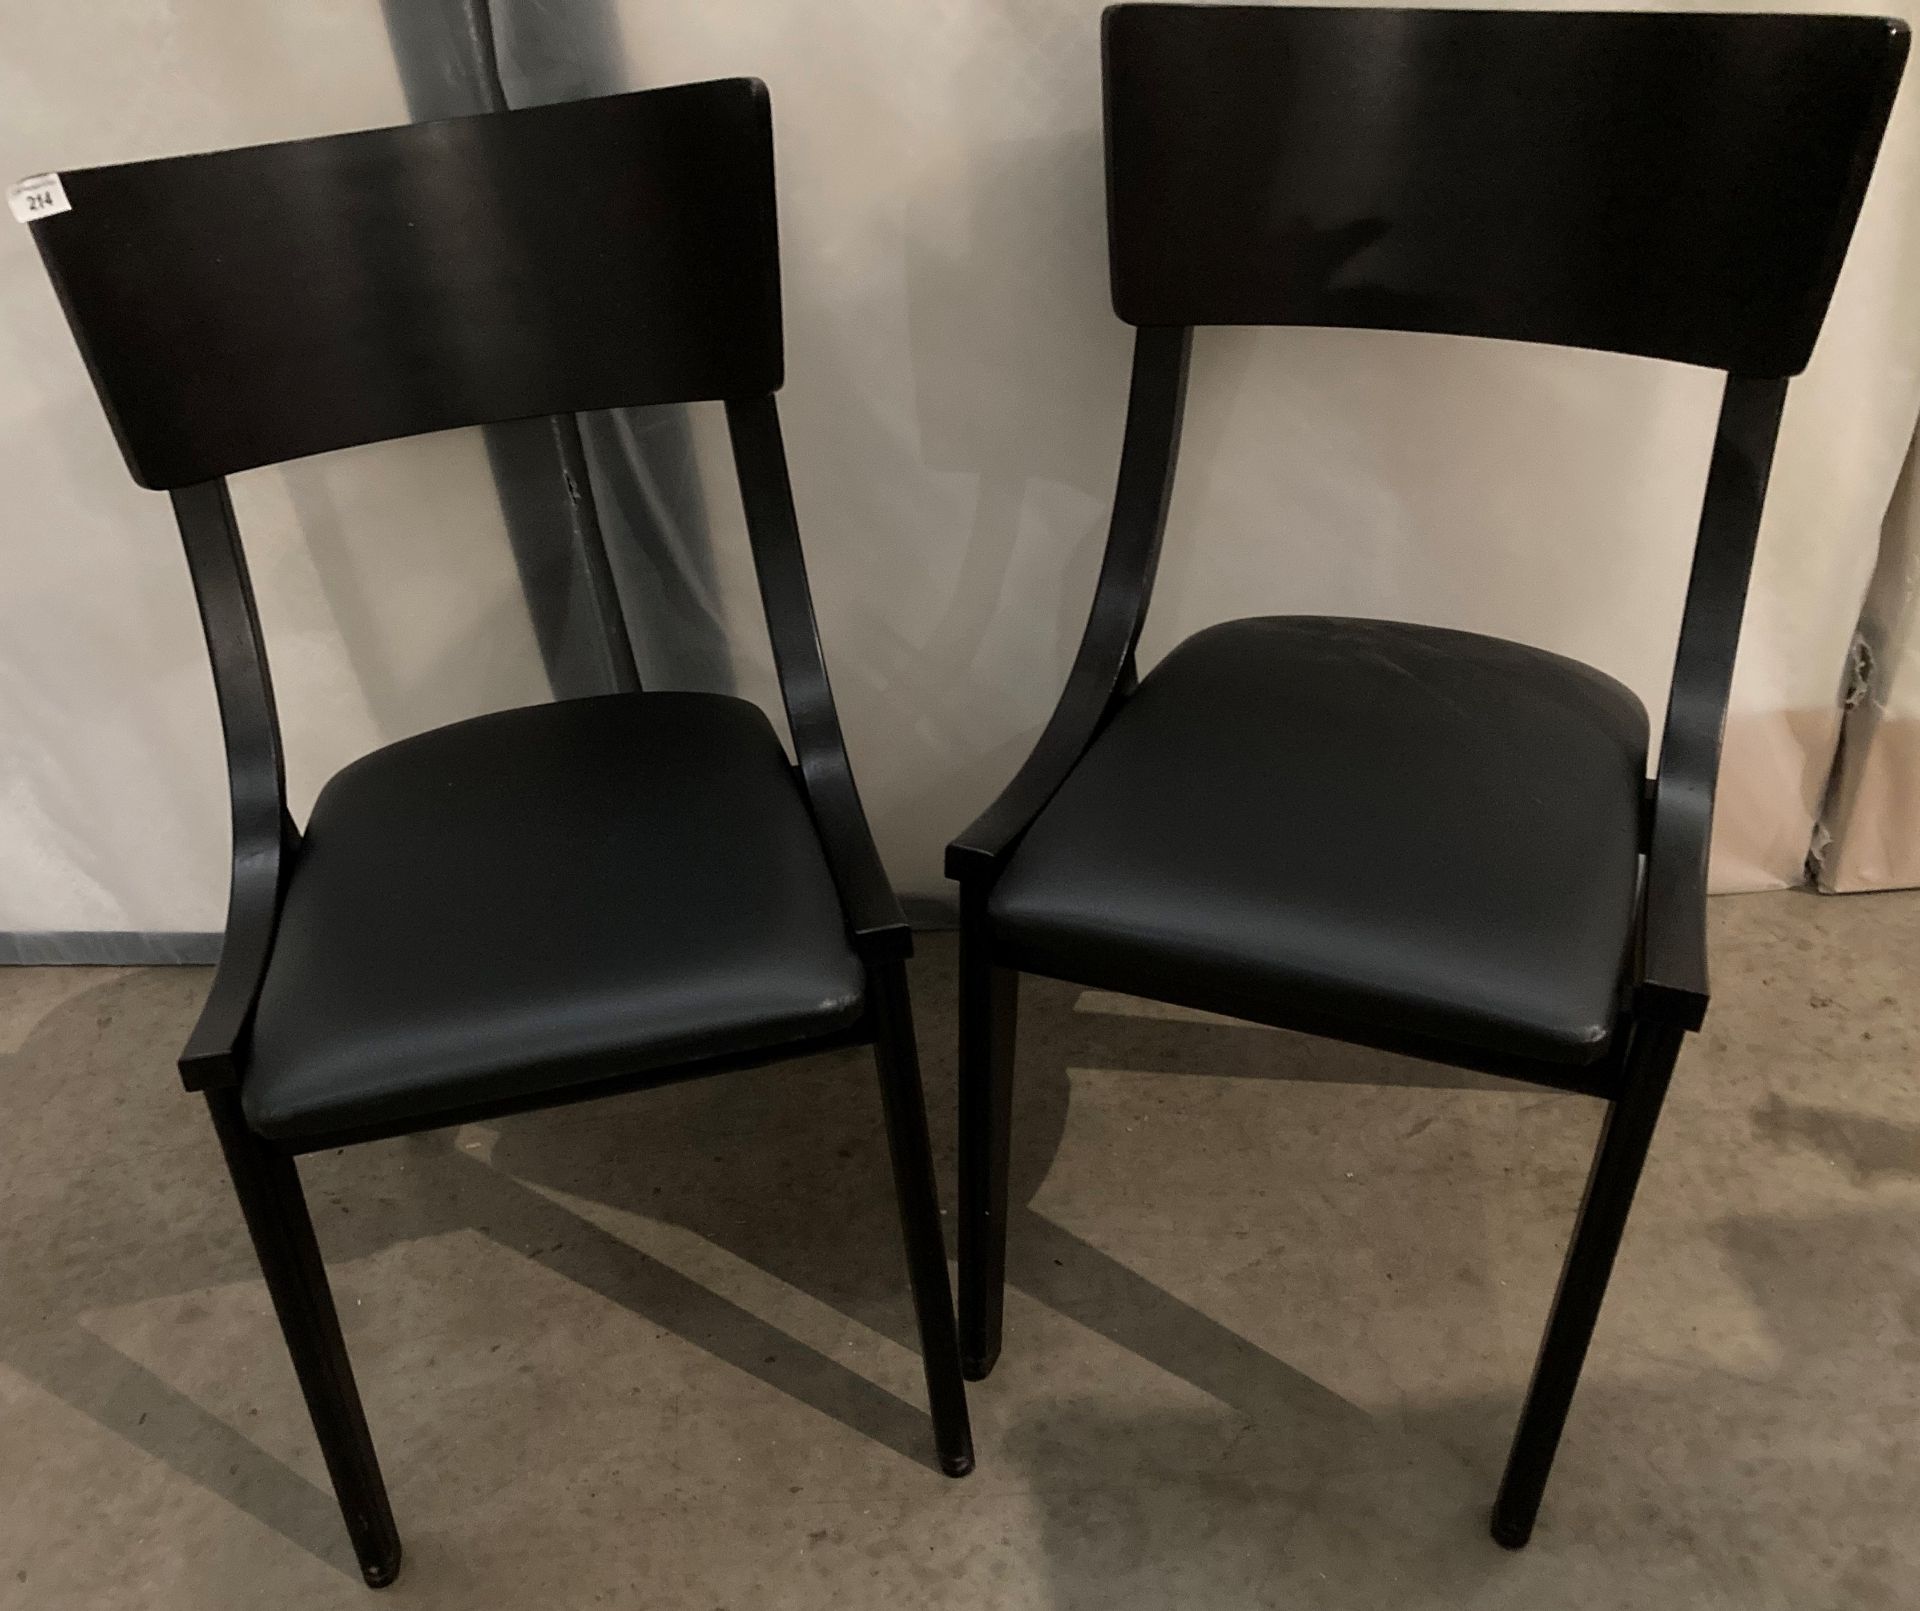 2 x Black Wooden Framed Dining Chairs with Leather Effect Seats